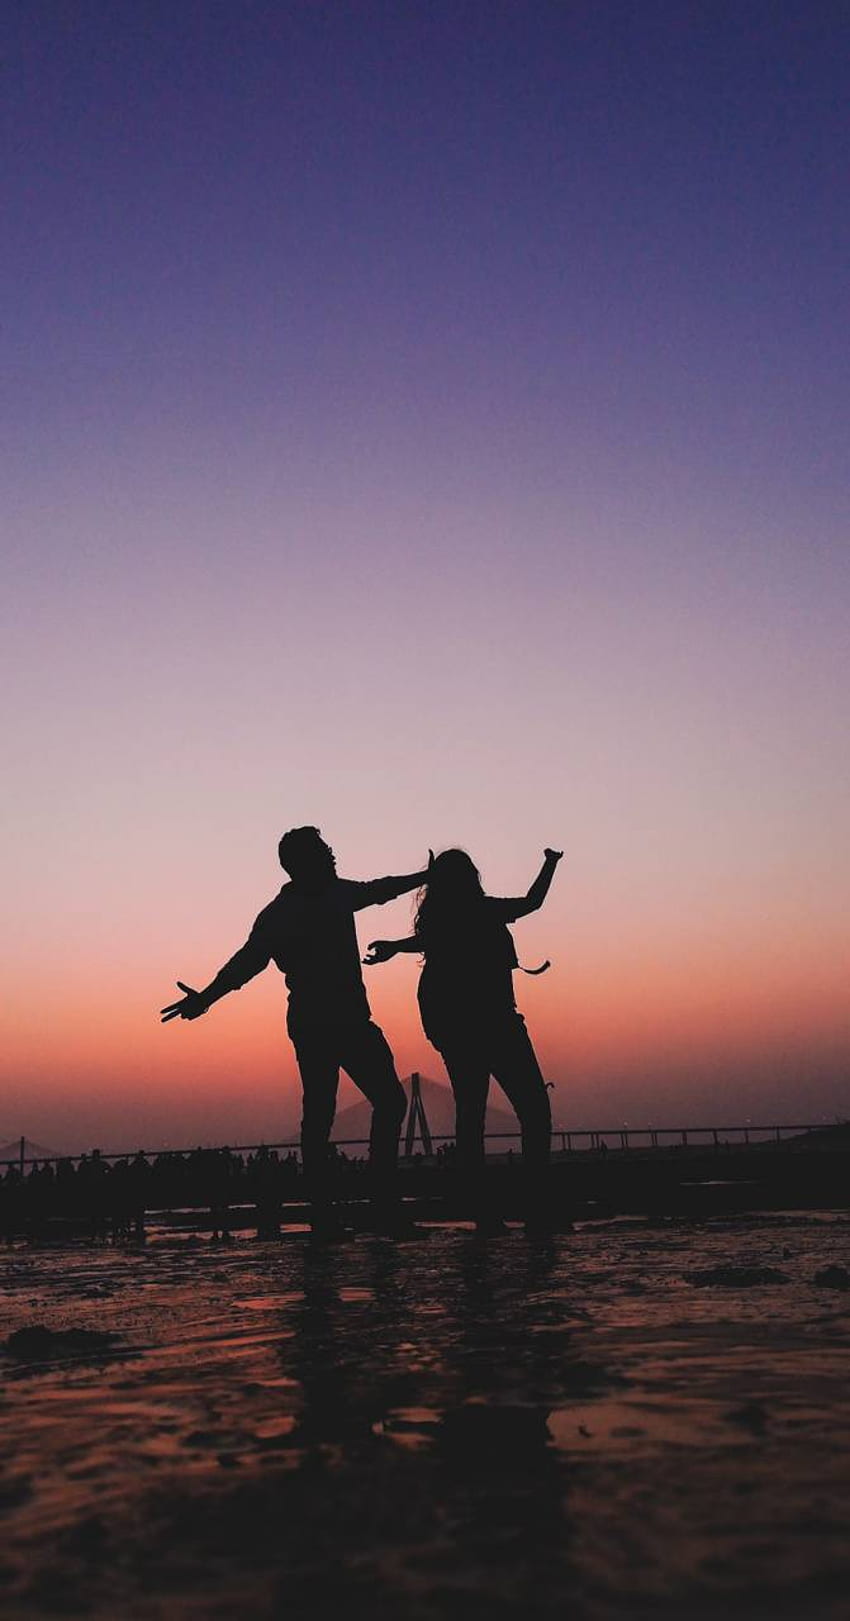 1179x2556px, 1080P Free download | Couple Goals iPhone - Couple Goal ...